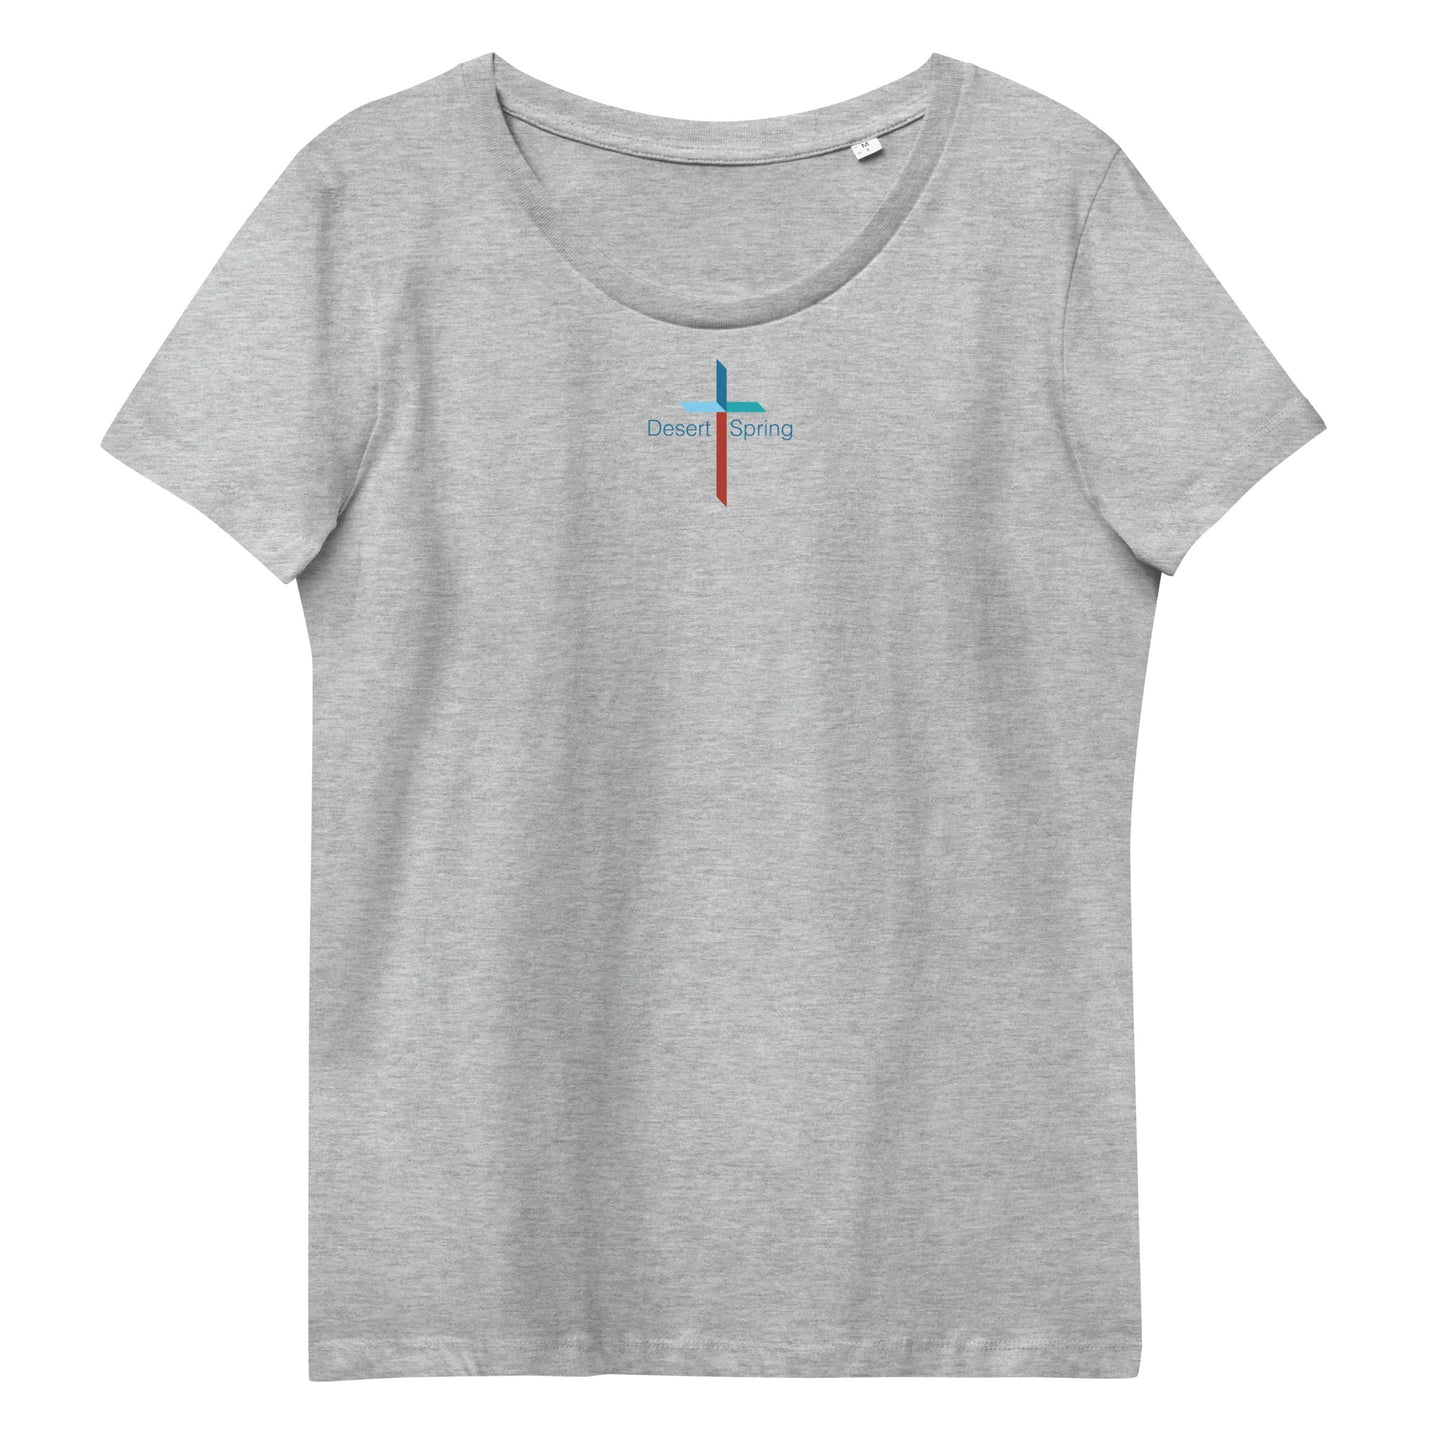 Women's "Meredith" Cross fitted eco tee